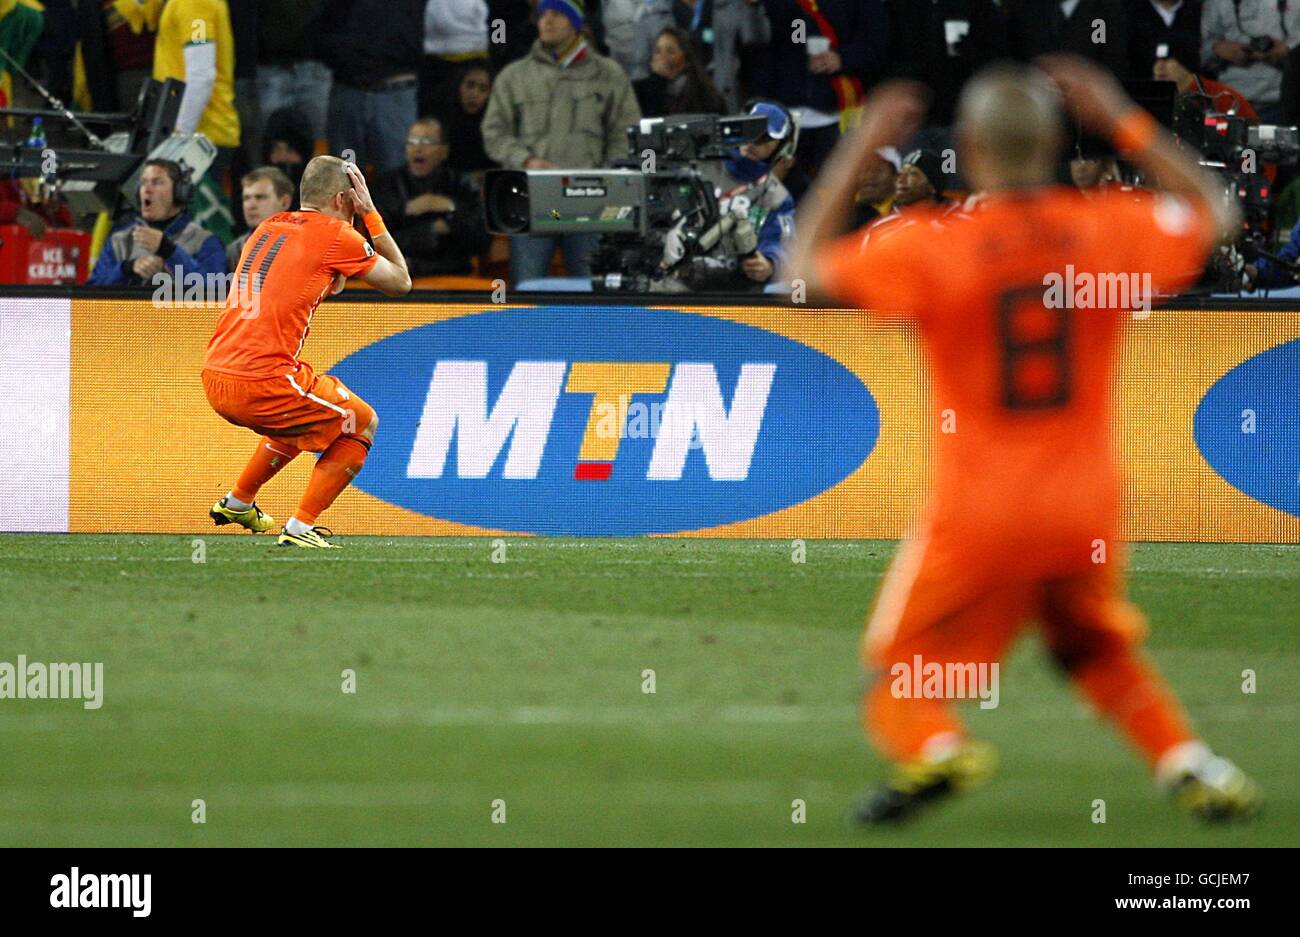 Netherlands' Arjen Robben (left) and Nigel De Jong (right) dejected after a missed chance on goal Stock Photo